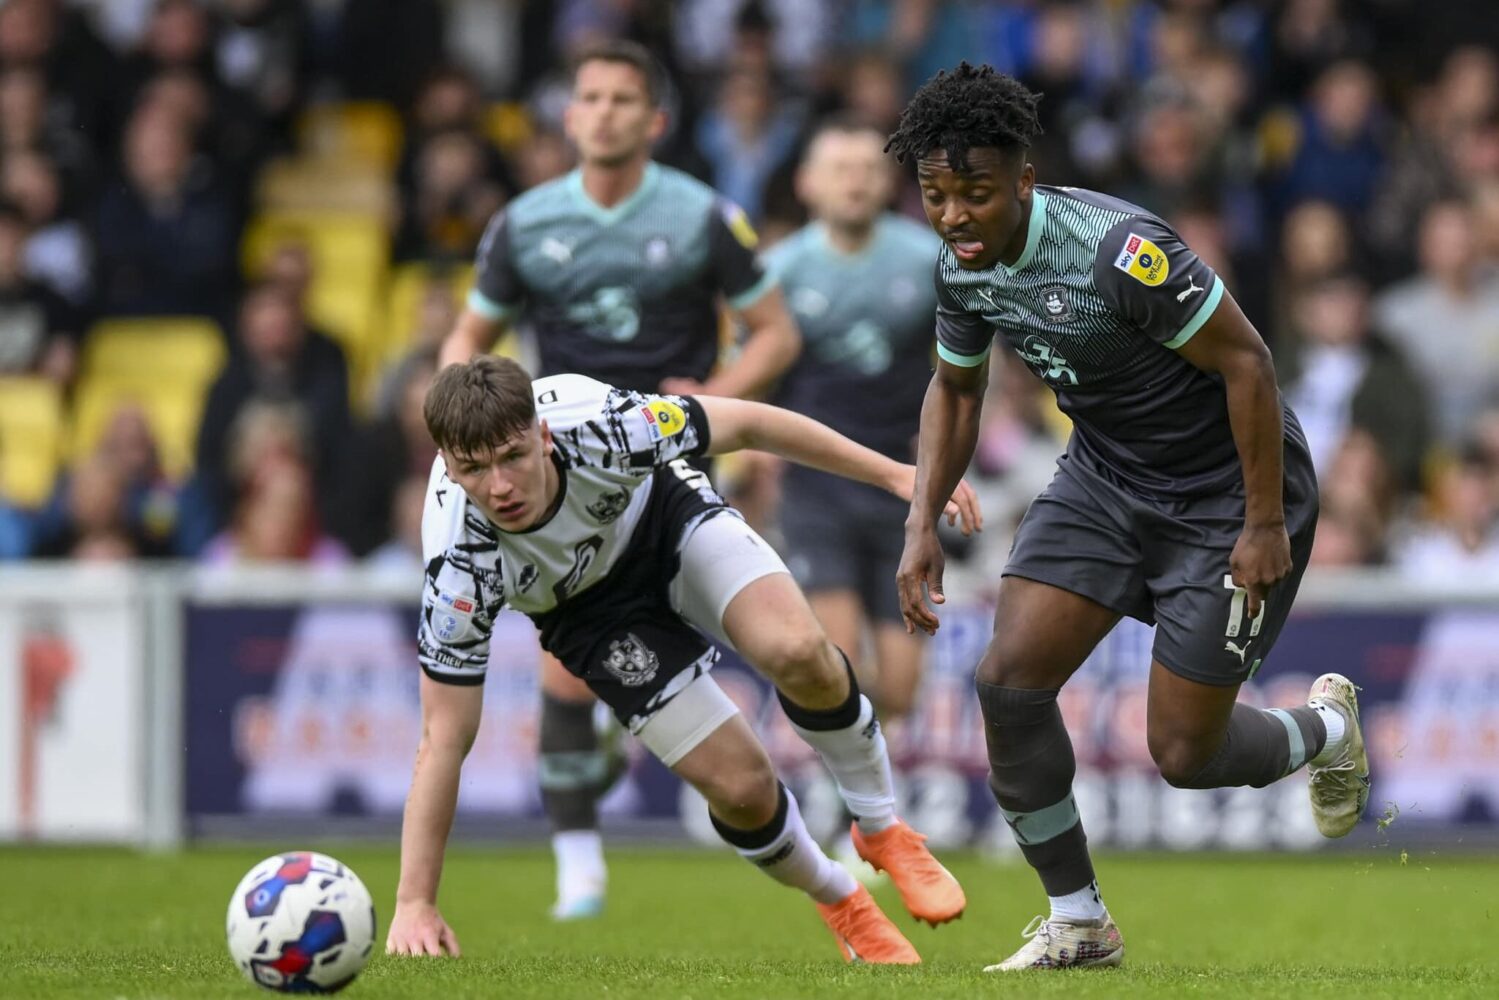 A Port Vale FC and Plymouth Argyle FC player contest for a loose ball during a soccer match.